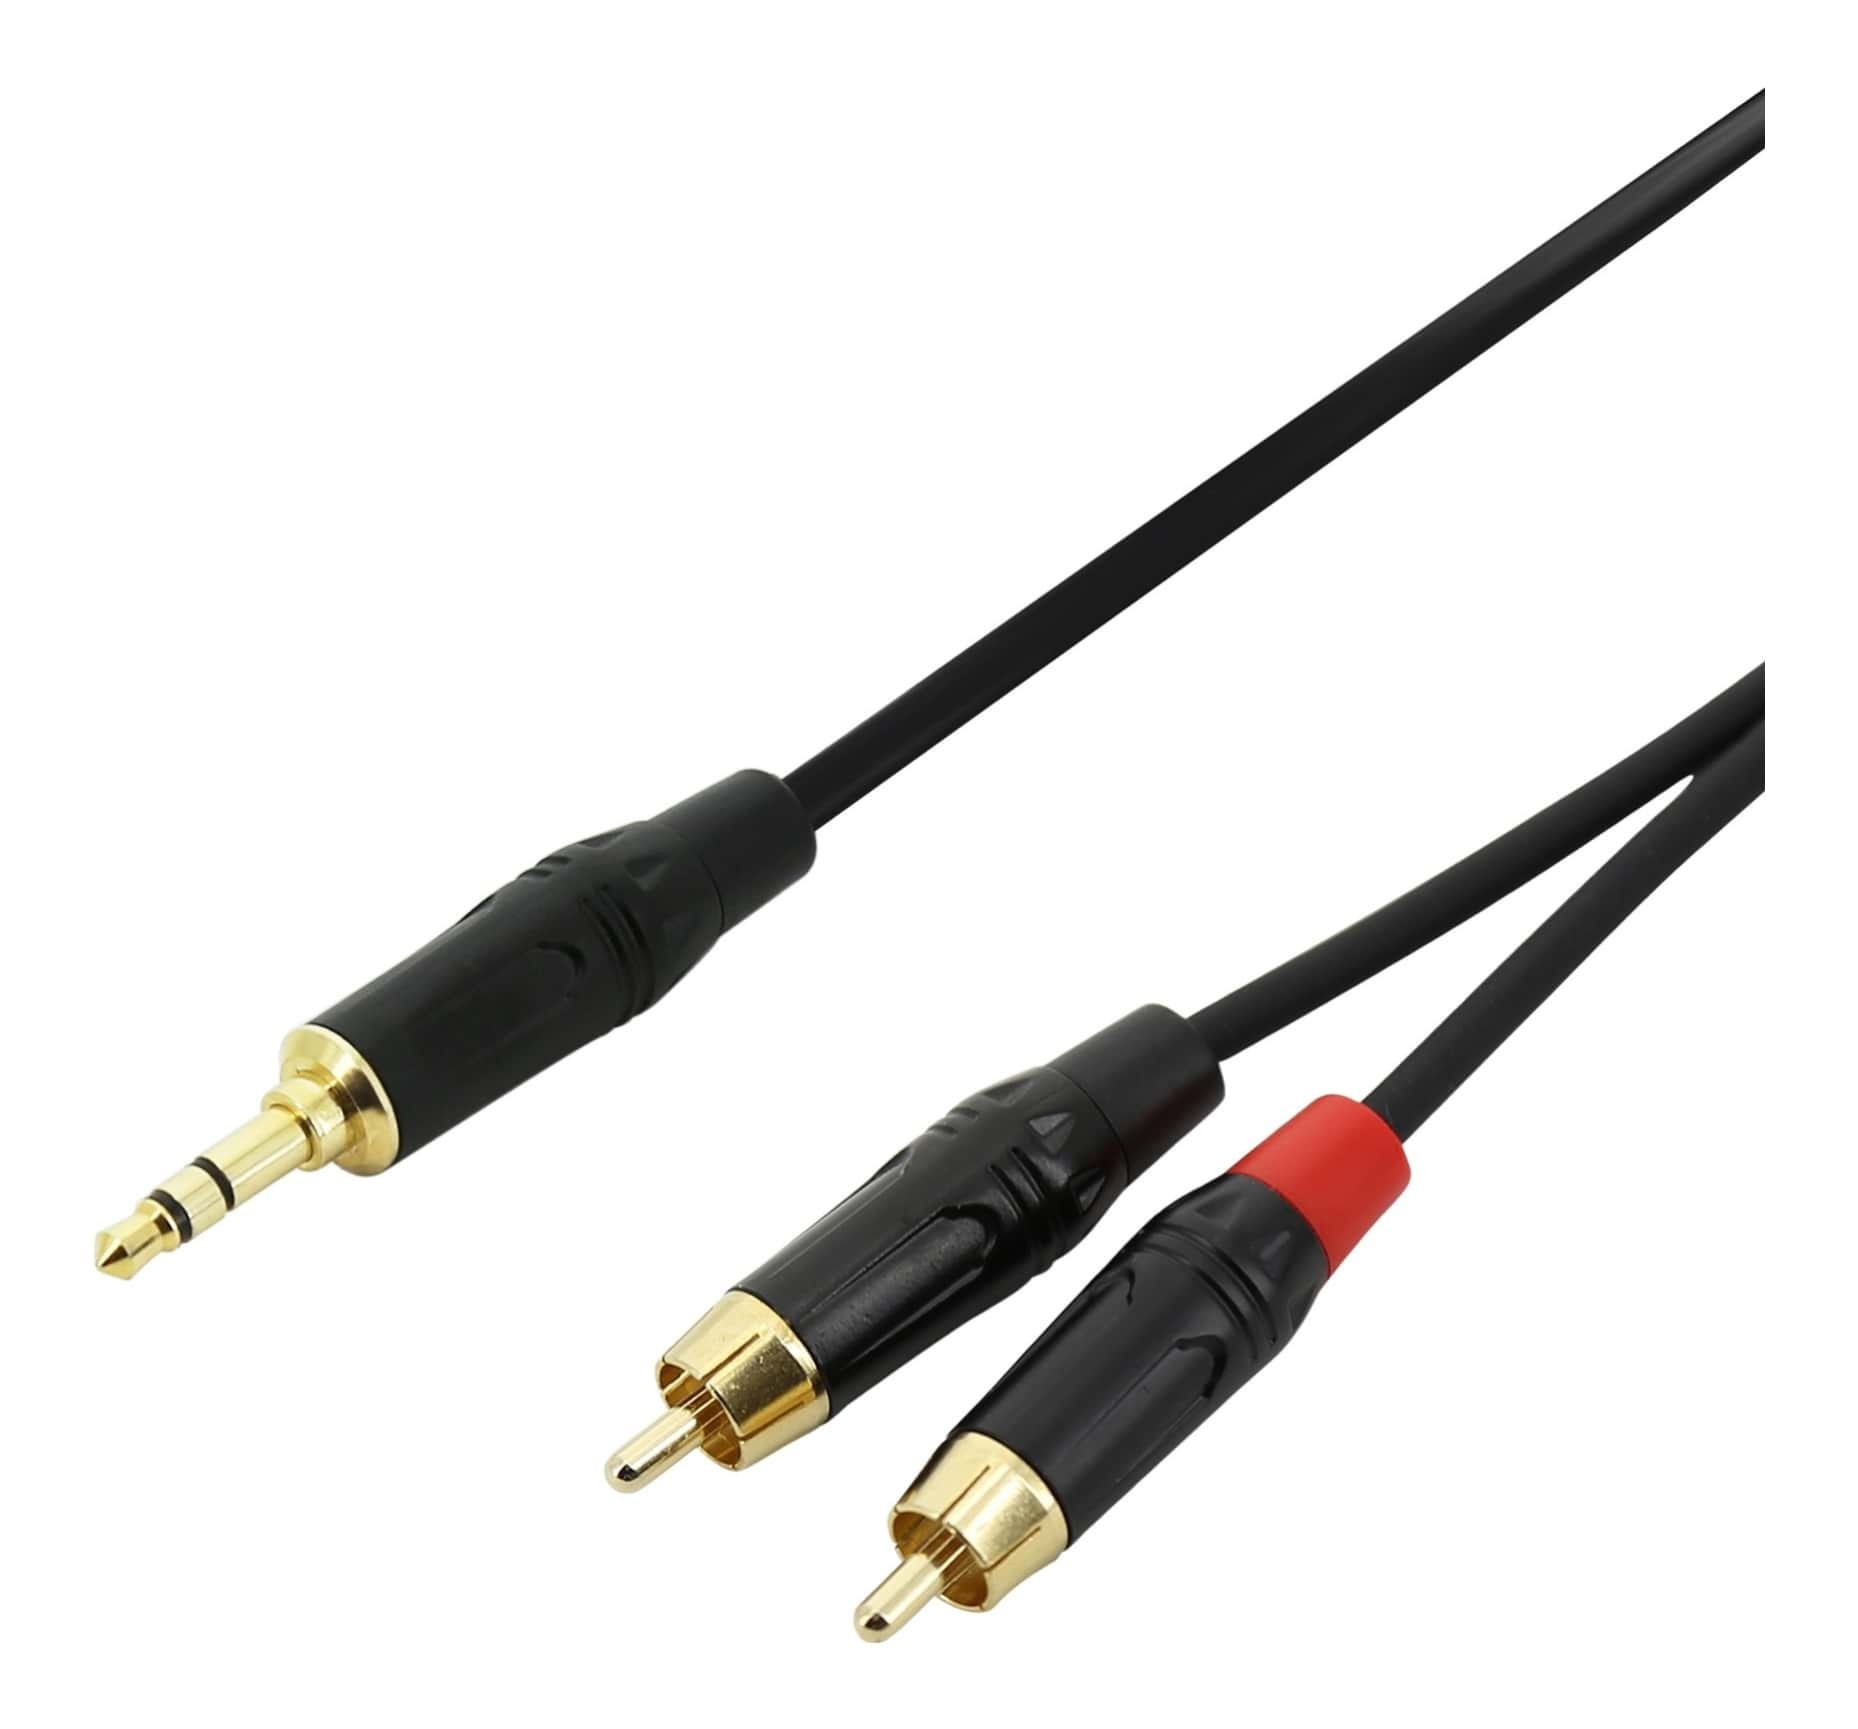 SWAMP Smartphone to Dual RCA Cable - Extended 3.5mm Mini-Jack